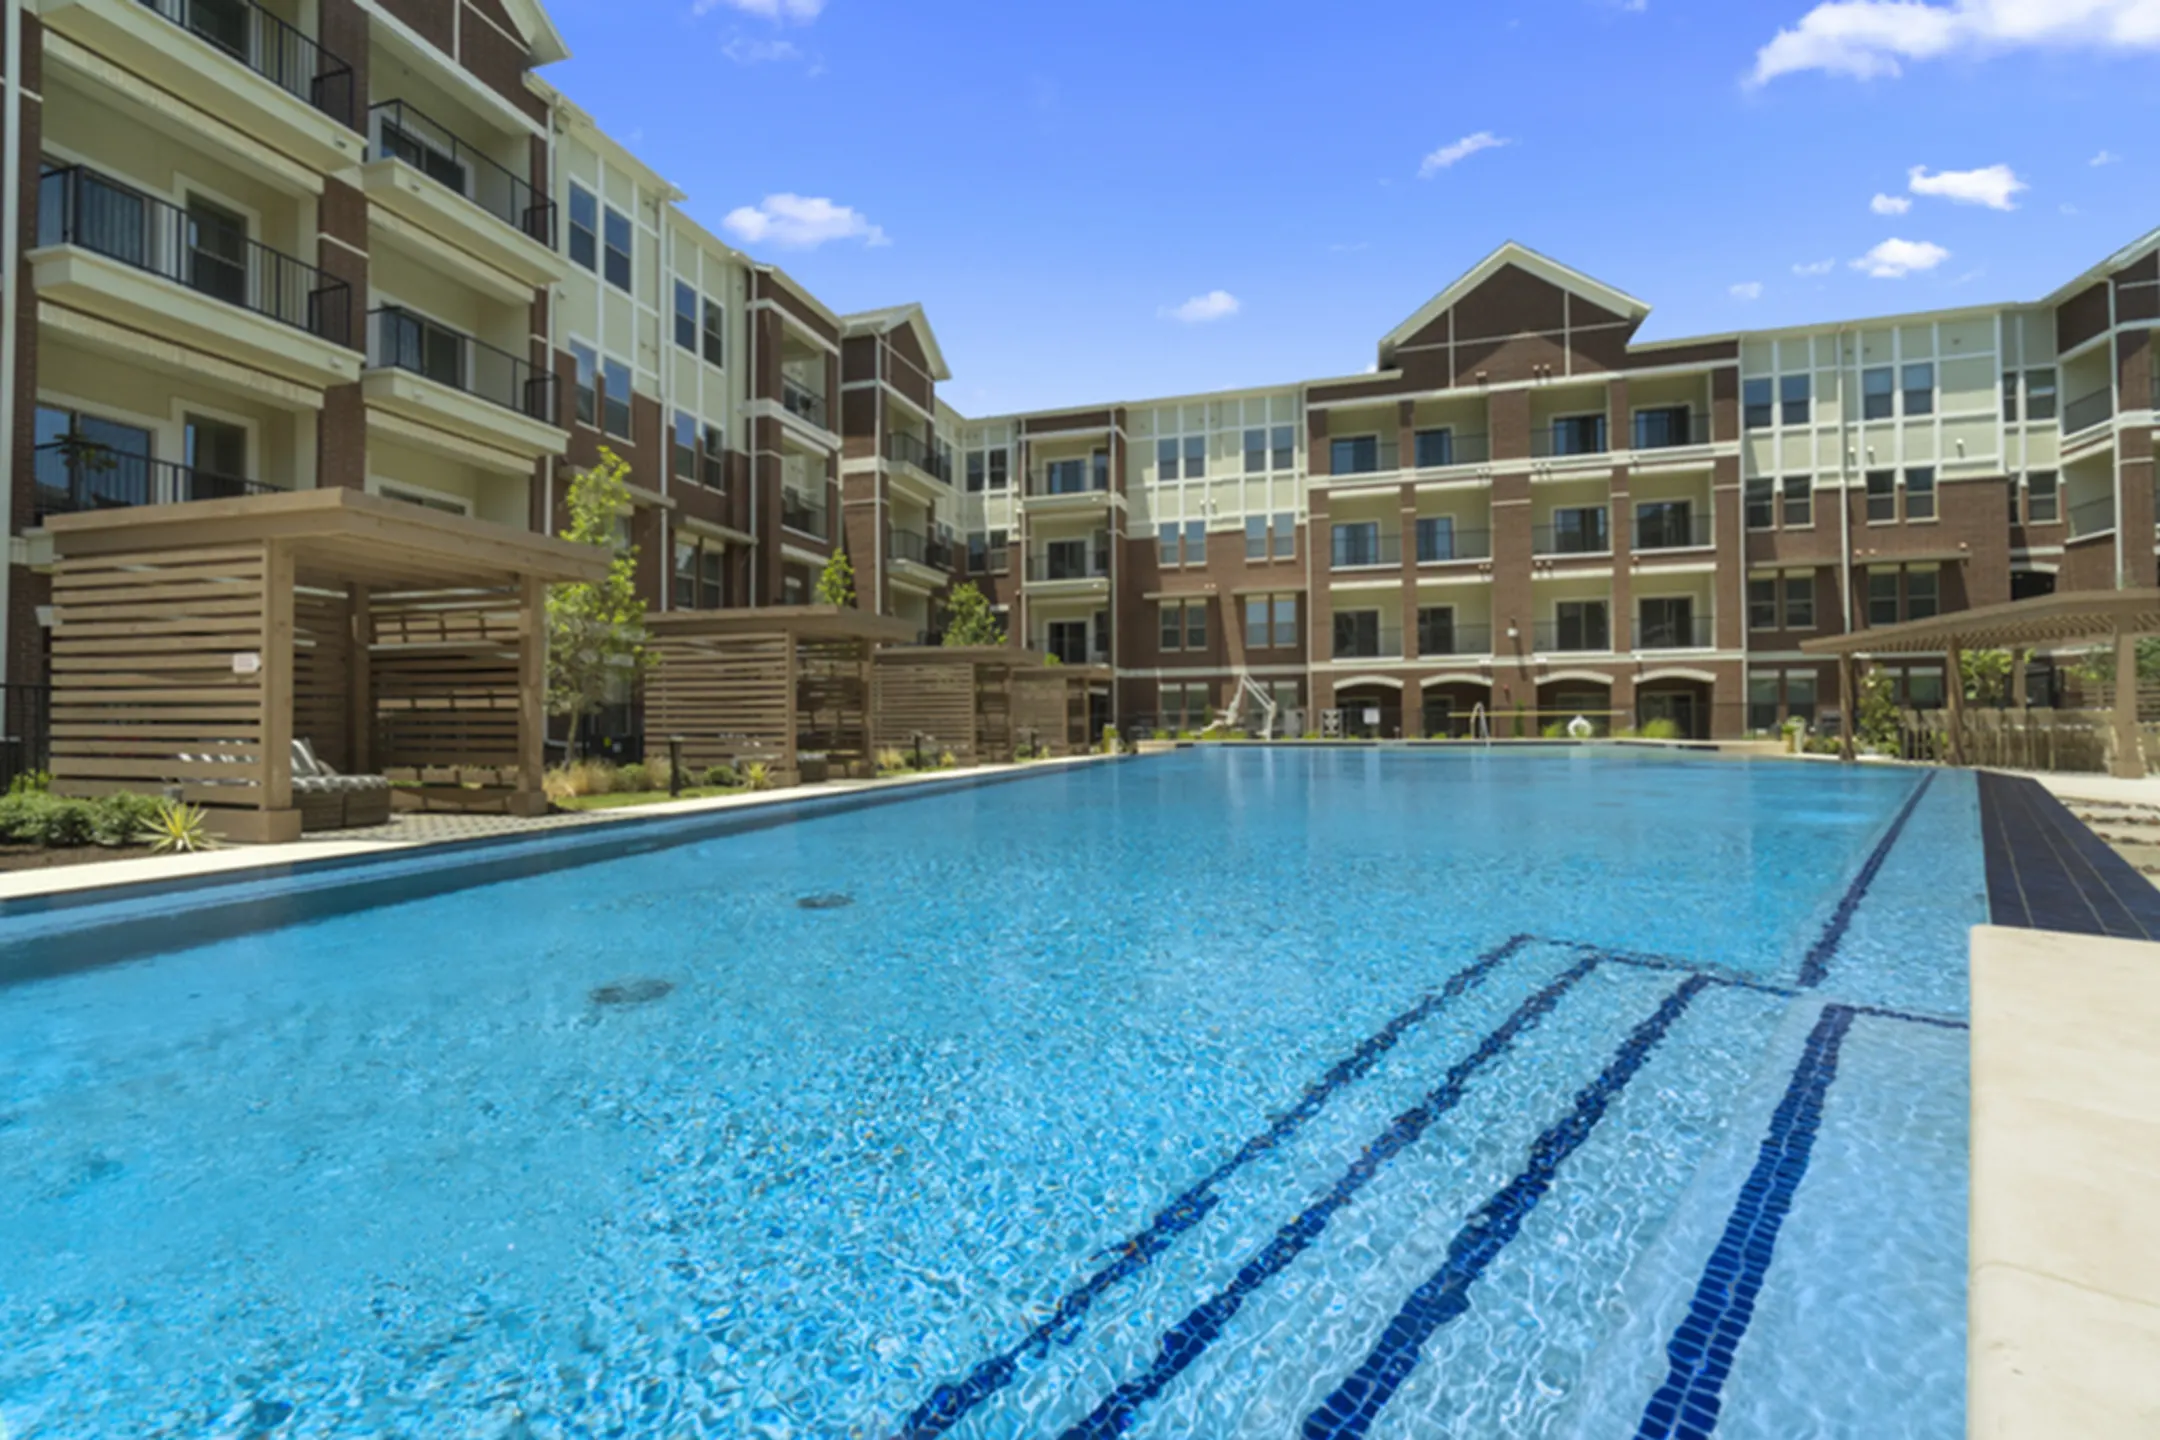 Pool - The Mansions at Mercer Crossing - Farmers Branch, TX